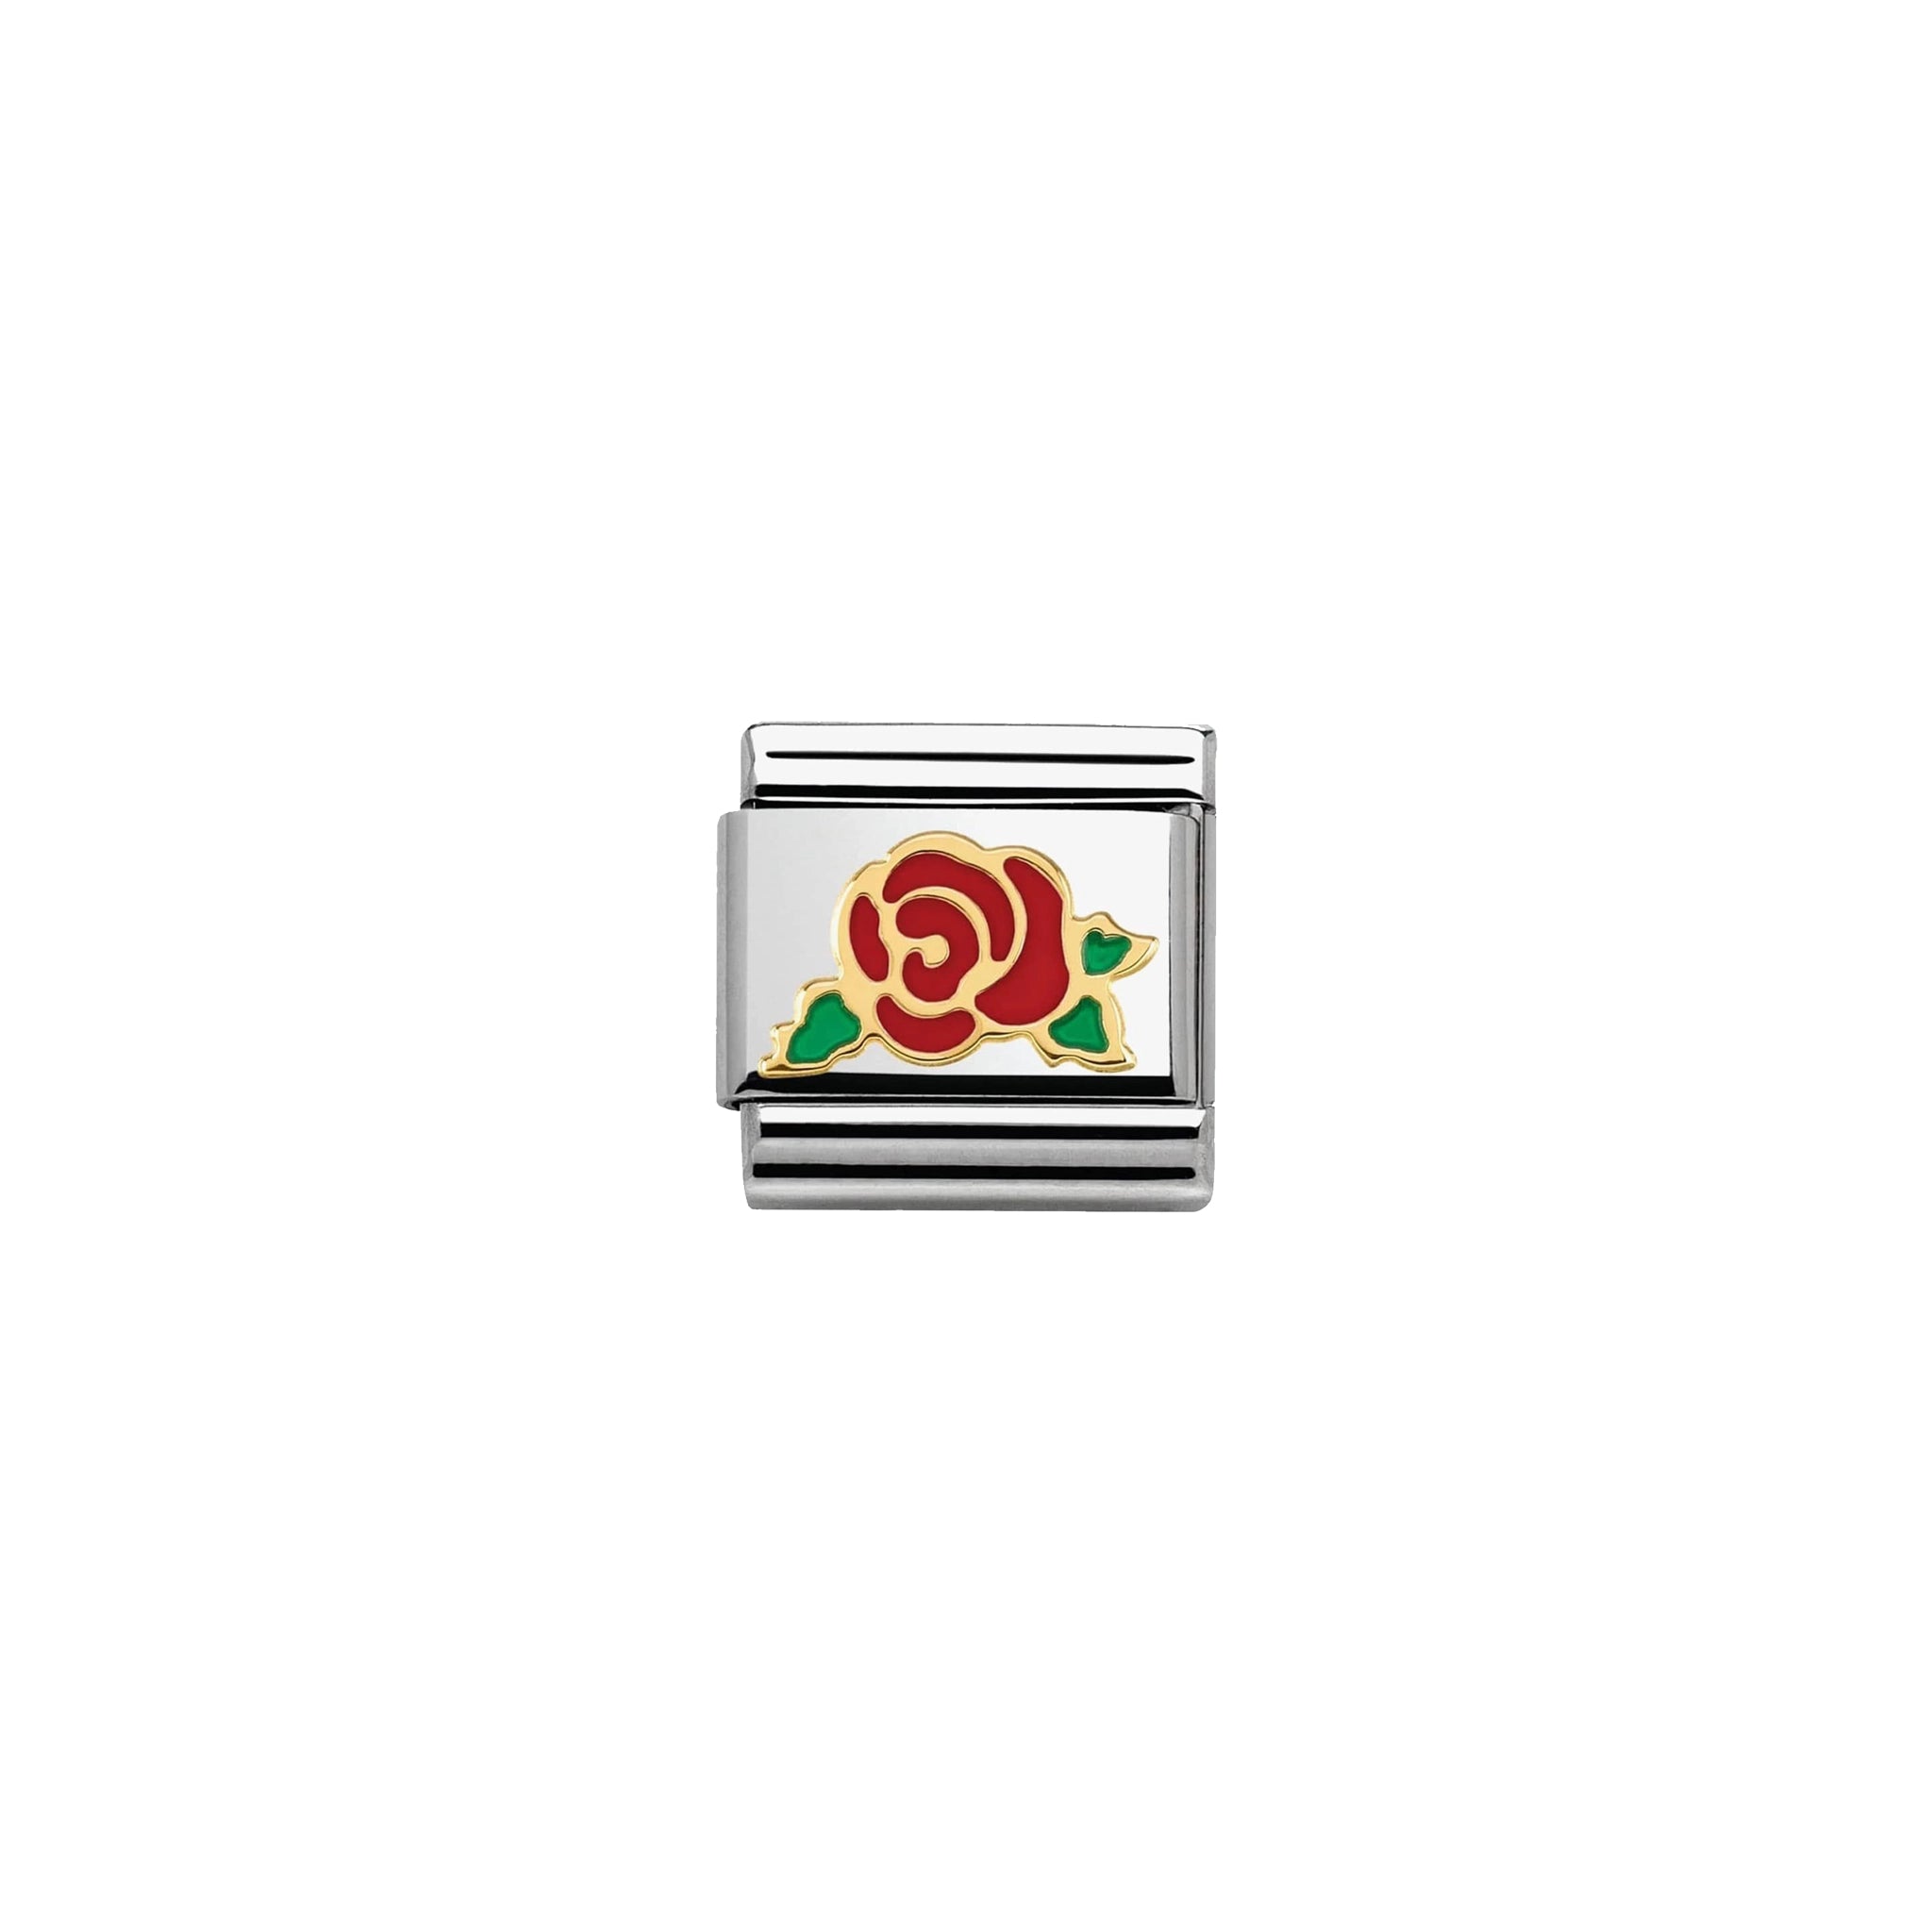 A Nomination charm link featuring a gold rose with red enamel and green leaves